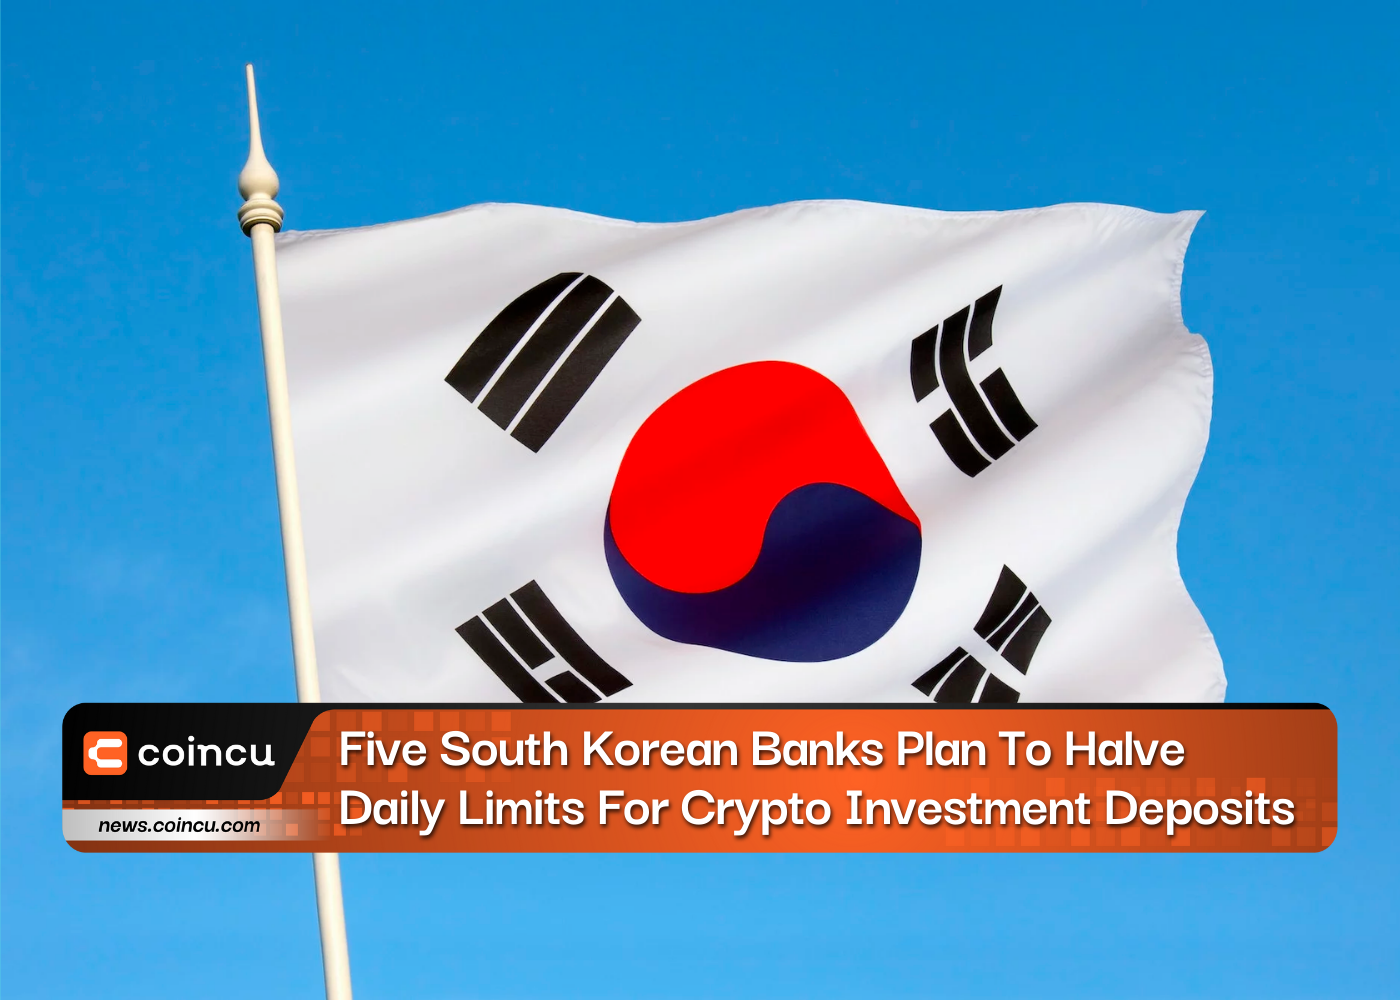 Five South Korean Banks Plan To Halve Daily Limits For Crypto Investment Deposits